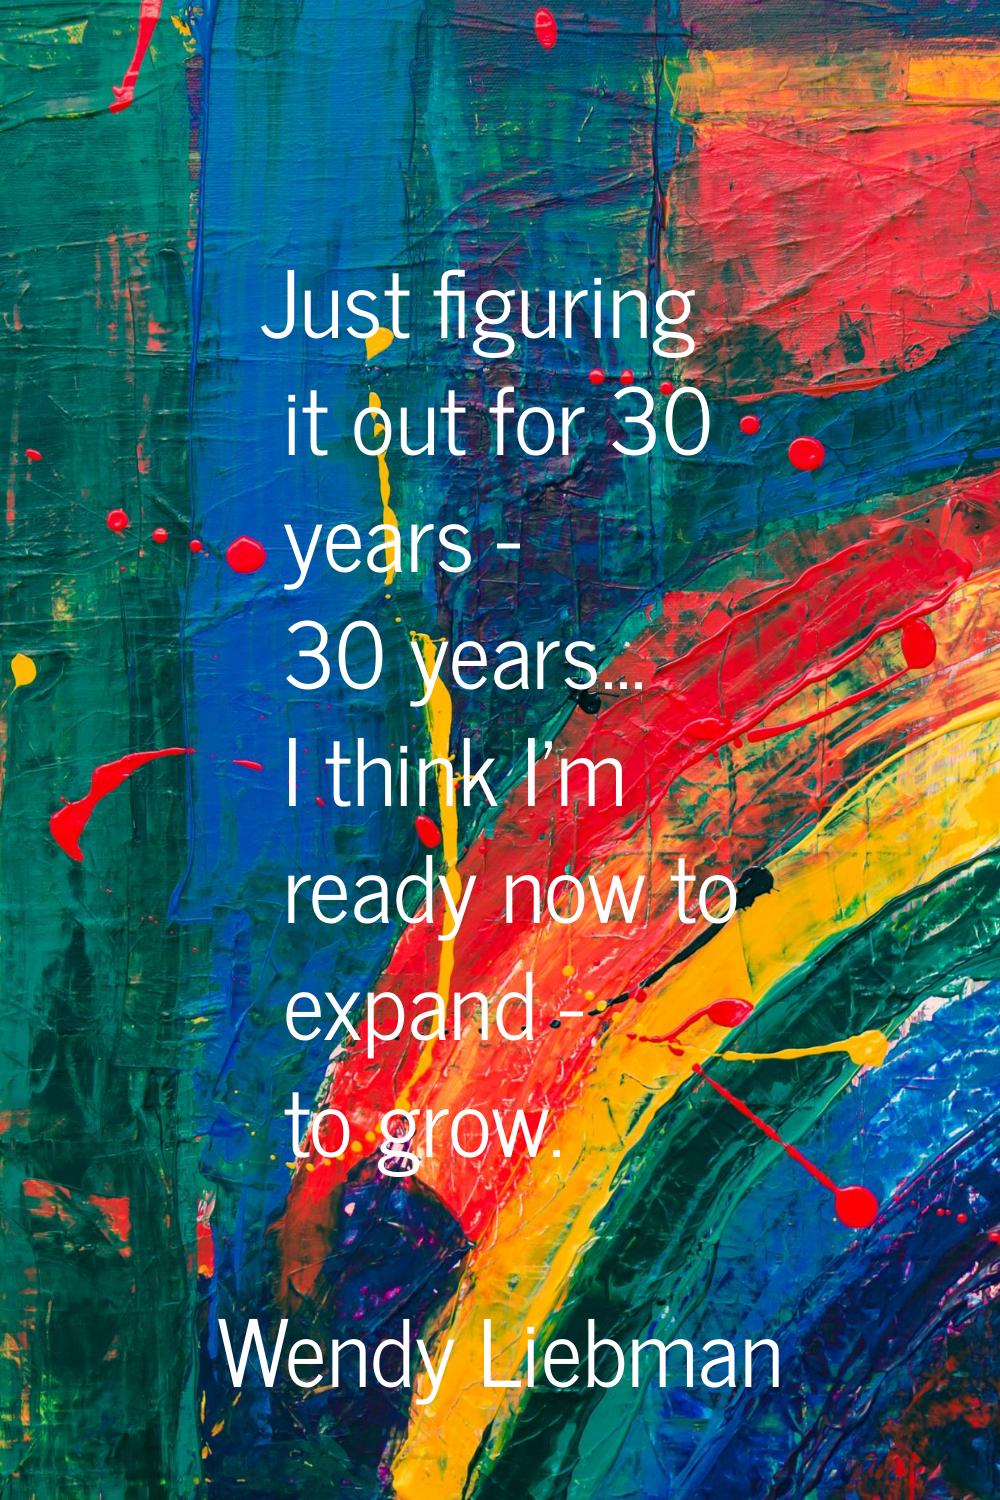 Just figuring it out for 30 years - 30 years... I think I'm ready now to expand - to grow.